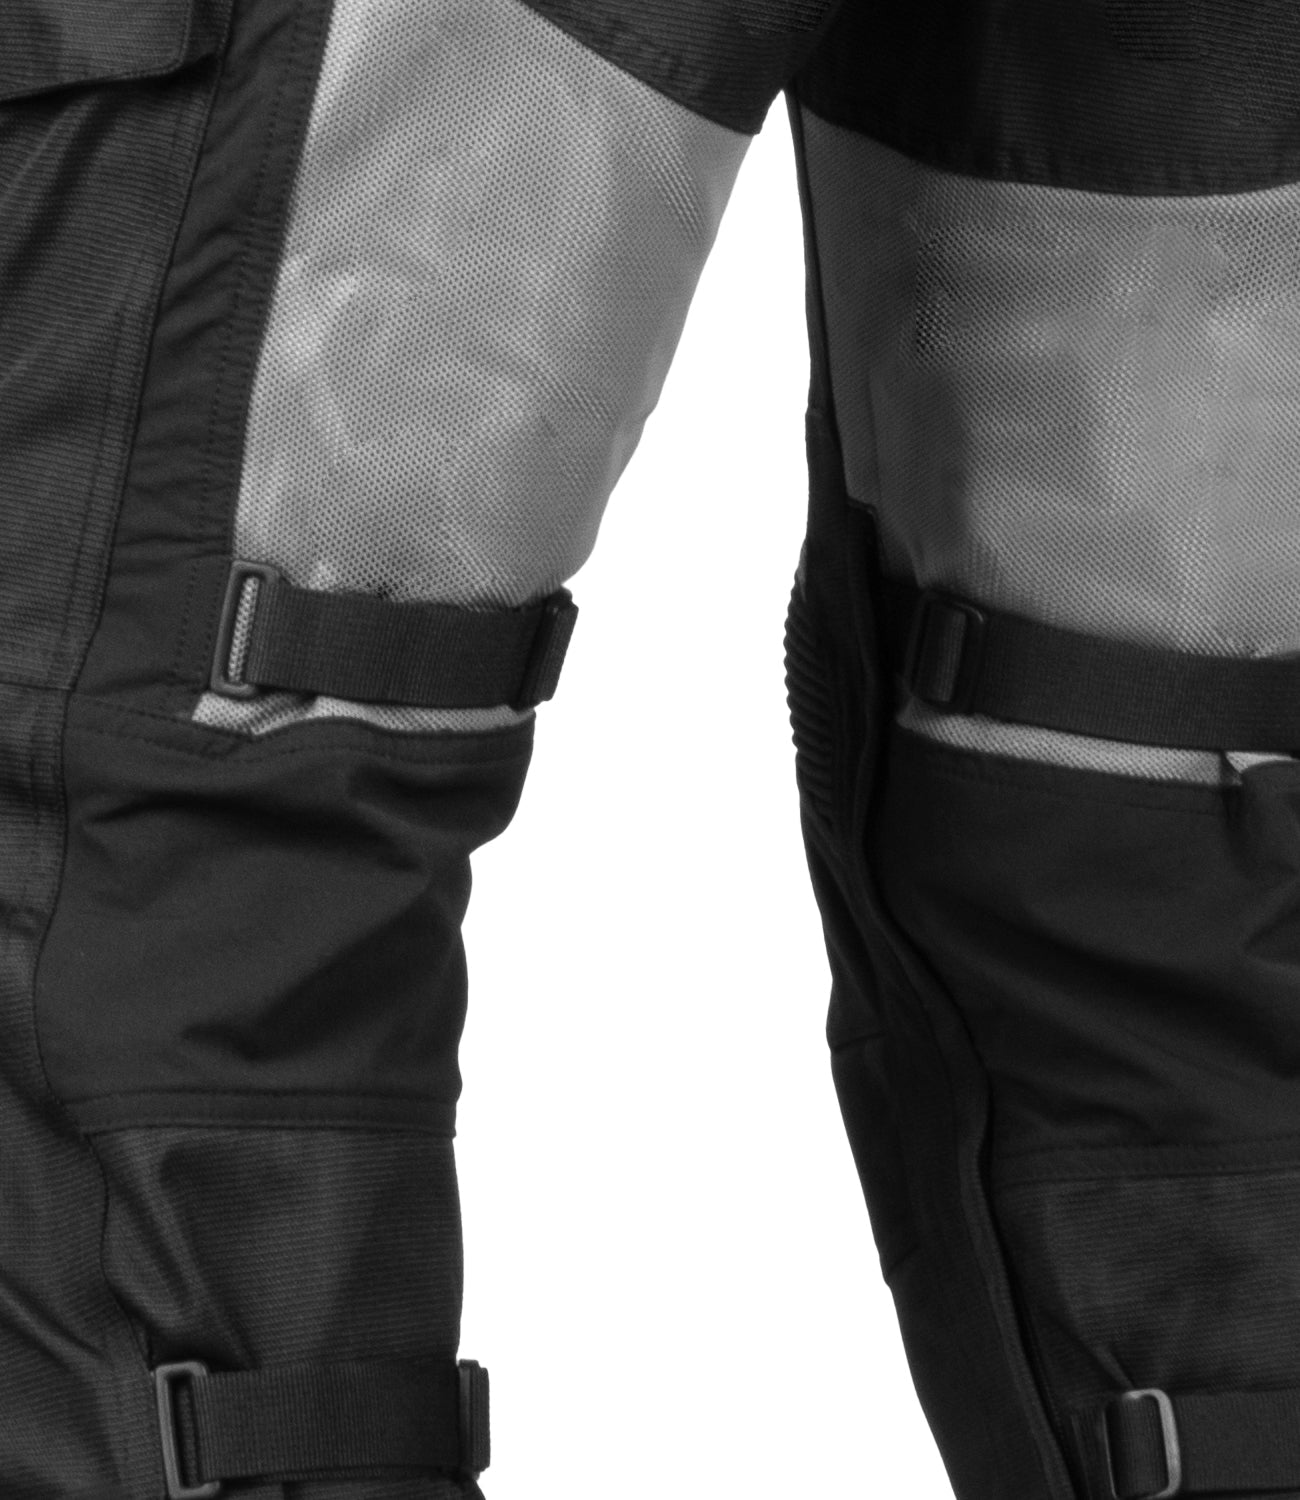 Airtex Riding Pants With their sleek, practical and functional design, the  Airtex pants are perfect for use round the… | Instagram